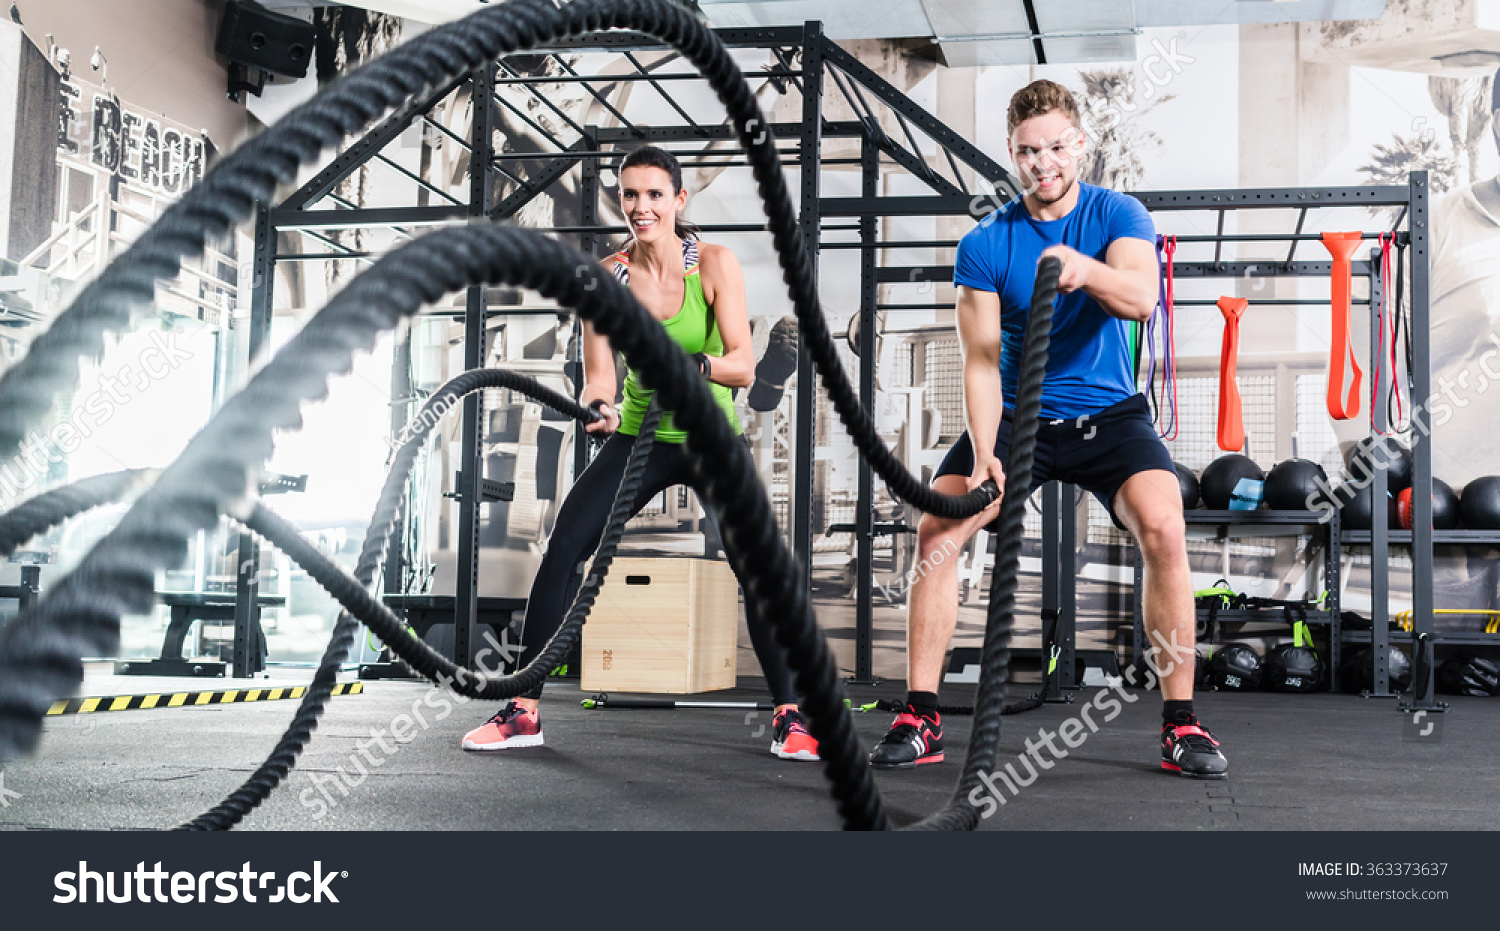 Men with battle rope in functional training fitness gym #363373637